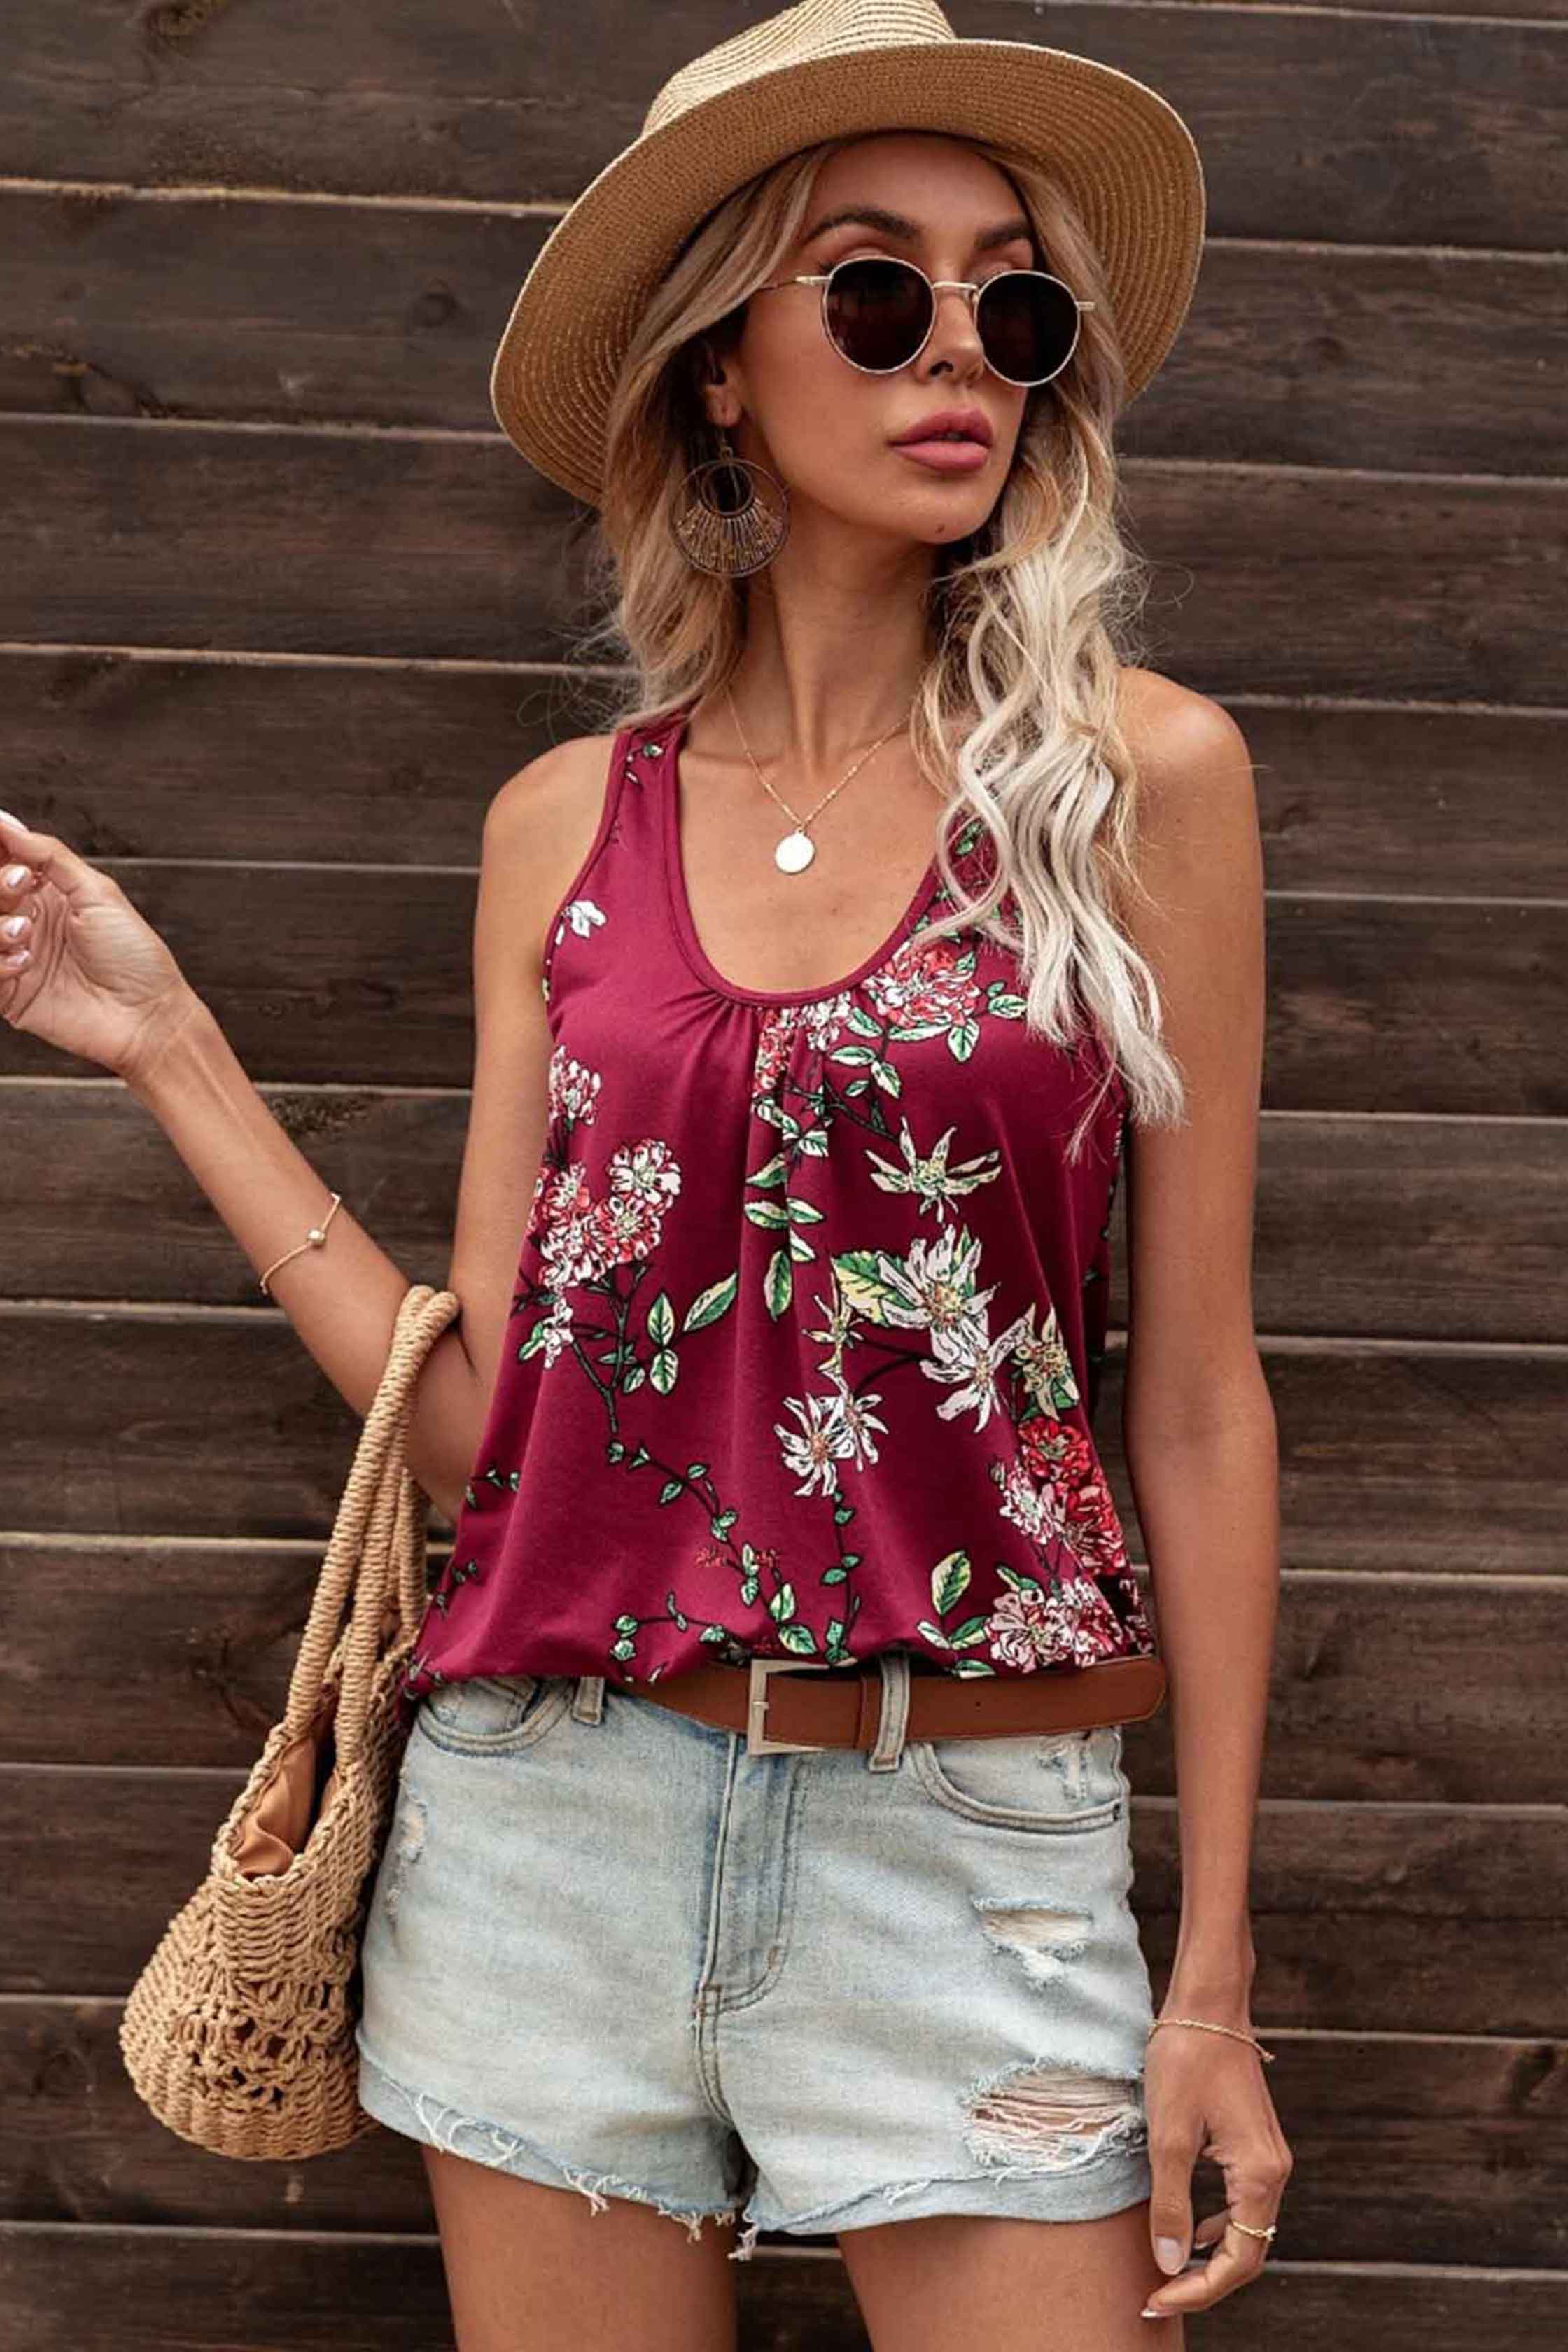 Floral Casual Sleeveless Swing Tank Top